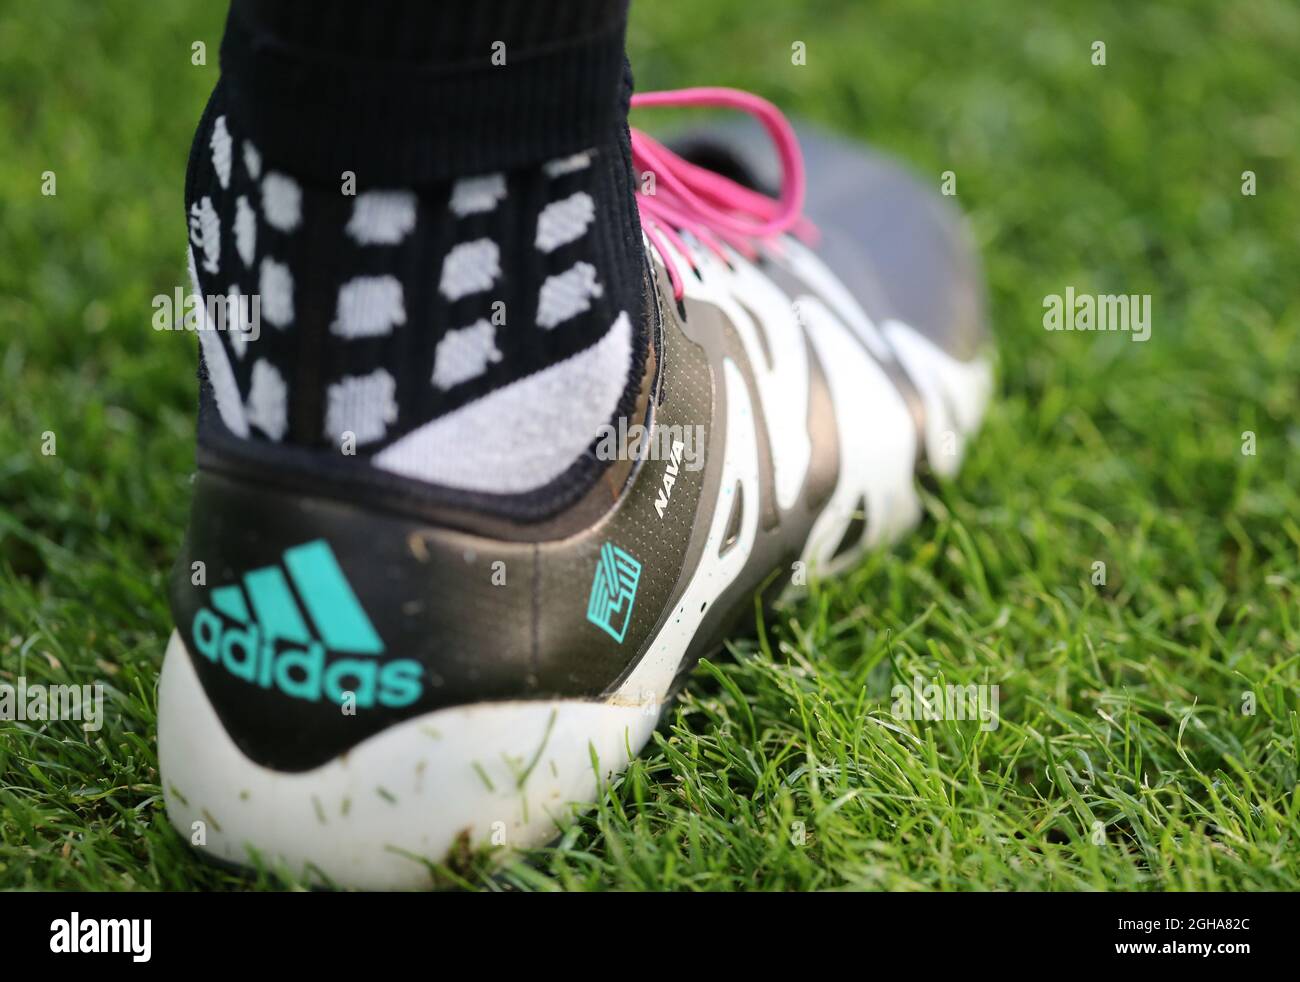 Gareth Bale of Wales with the name of his child Nava on his boot during the  UEFA European Championship 2016 match at the Stadium Lyon, Lyon. Picture  date July 06, 2016 Pic